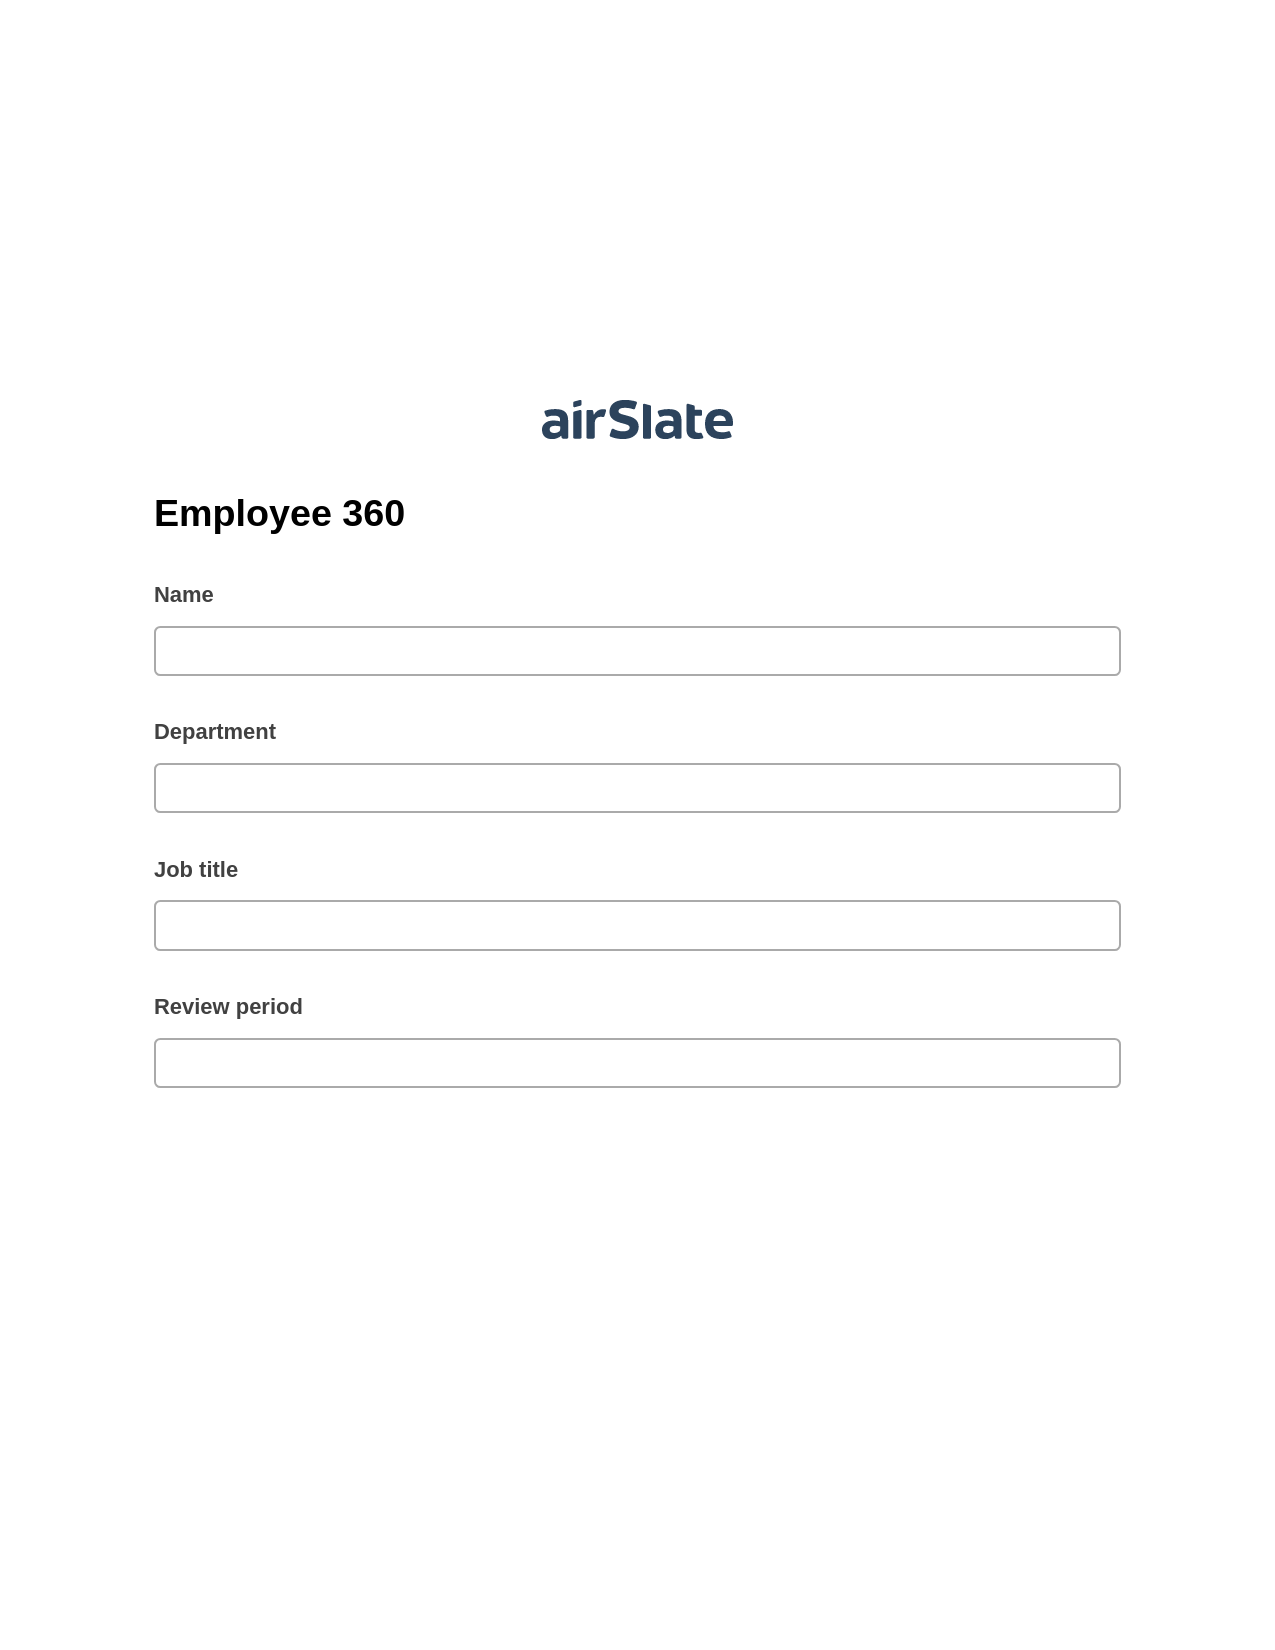 Employee 360 Pre-fill from MS Dynamics 365 Records, Export to MS Dynamics 365 Bot, Archive to Box Bot